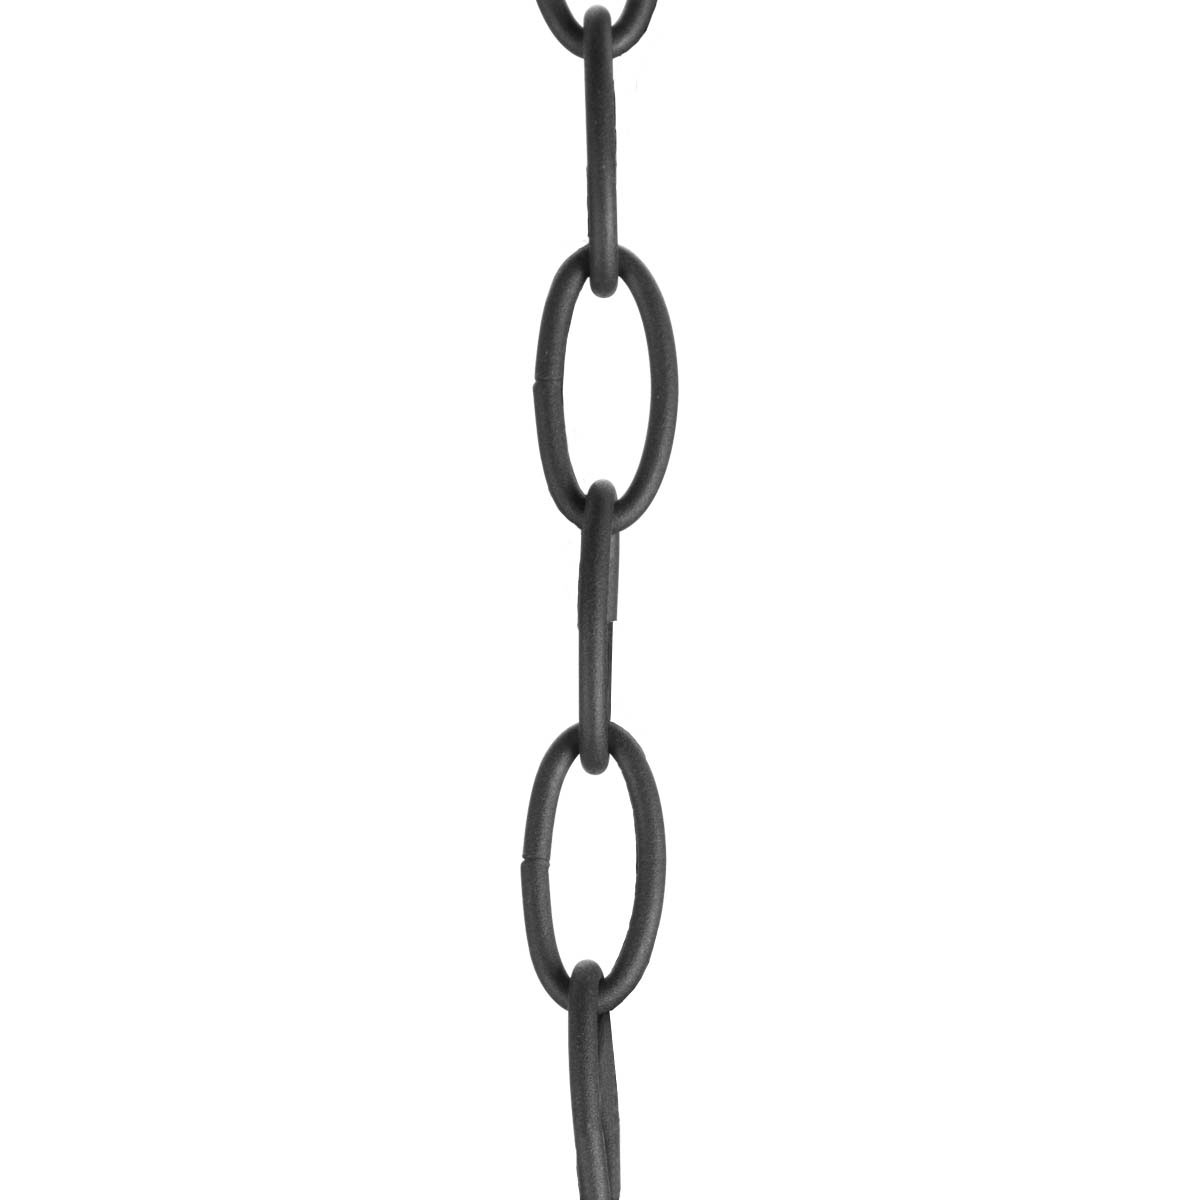 Ten feet of 9 gauge chain in Textured Black finish. Solid chain permits installation of chain-hung fixtures on high ceilings. Maximum fixture weight 50 lbs.